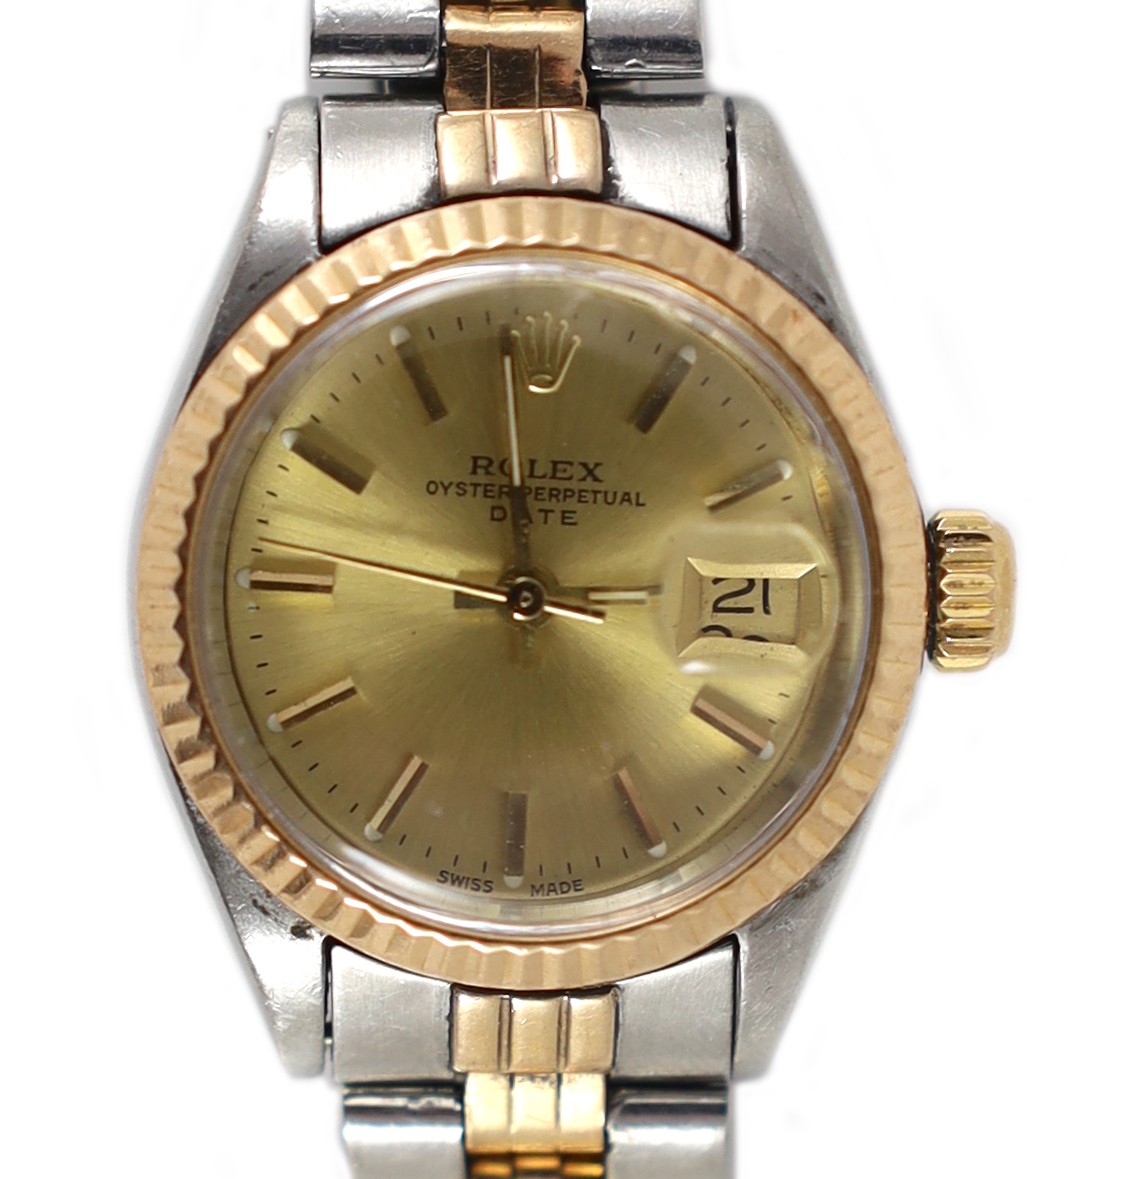 A lady's 1970's steel and gold Rolex Oyster Perpetual Date wrist watch, on a Rolex steel and gold